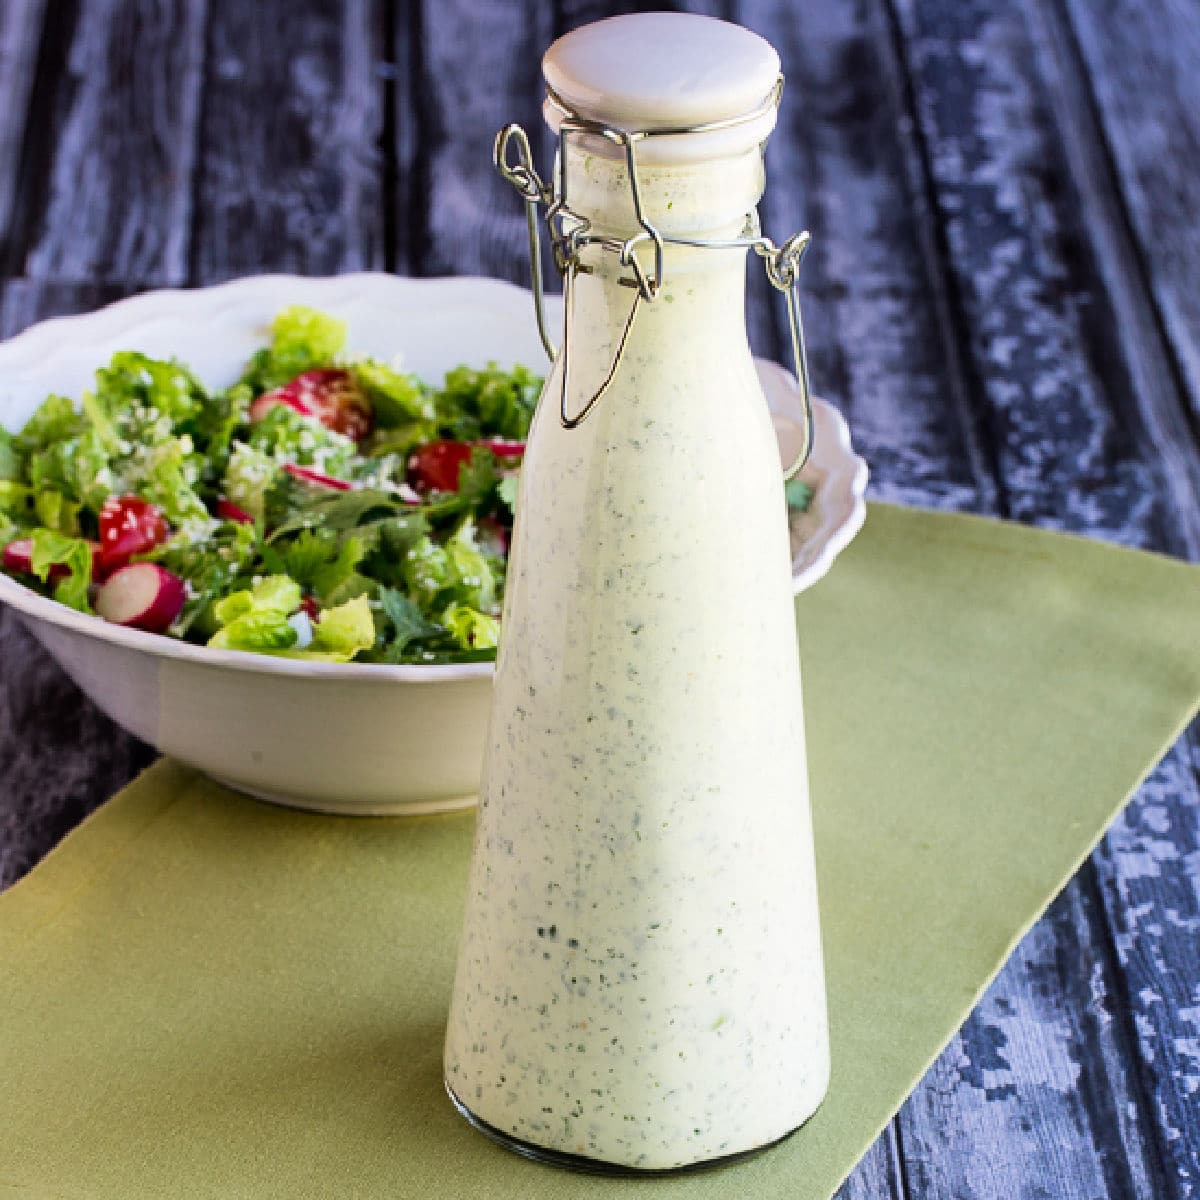 Square image for Cafe Rio Salad Dressing shown in bottle with salad in back.